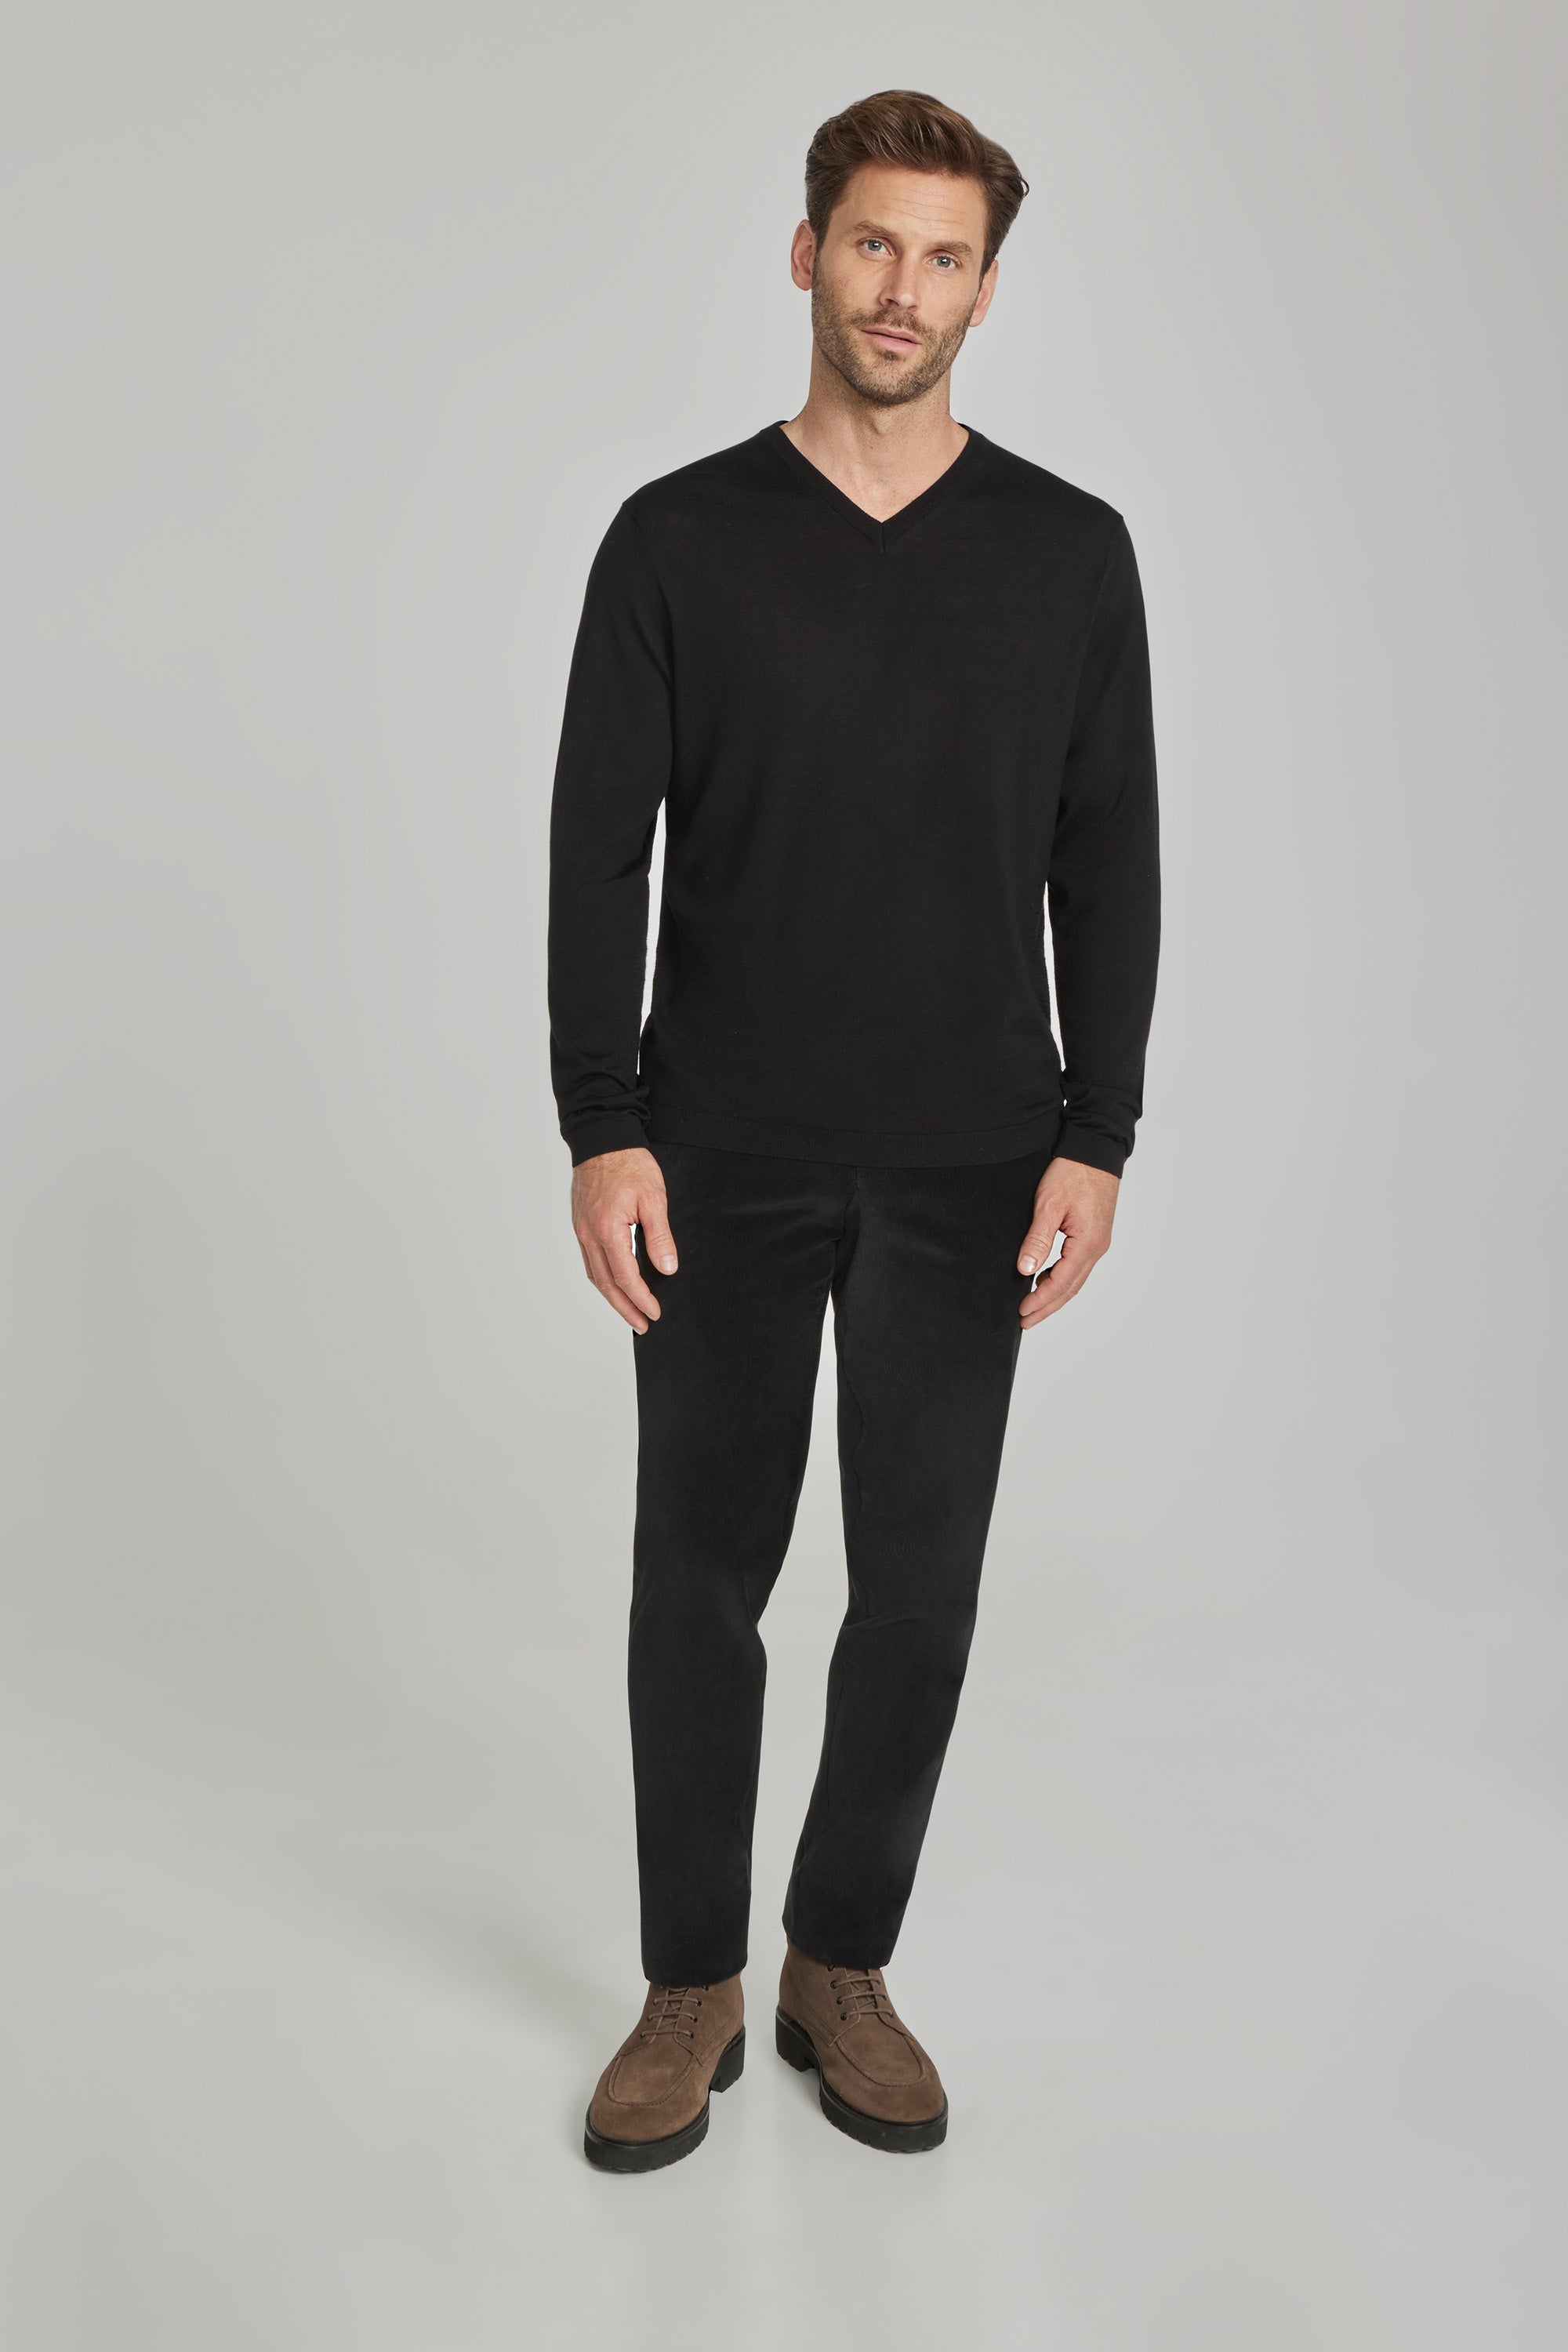 Alt view 2 Ramezay Wool, Silk and Cashmere V-Neck Sweater in Black